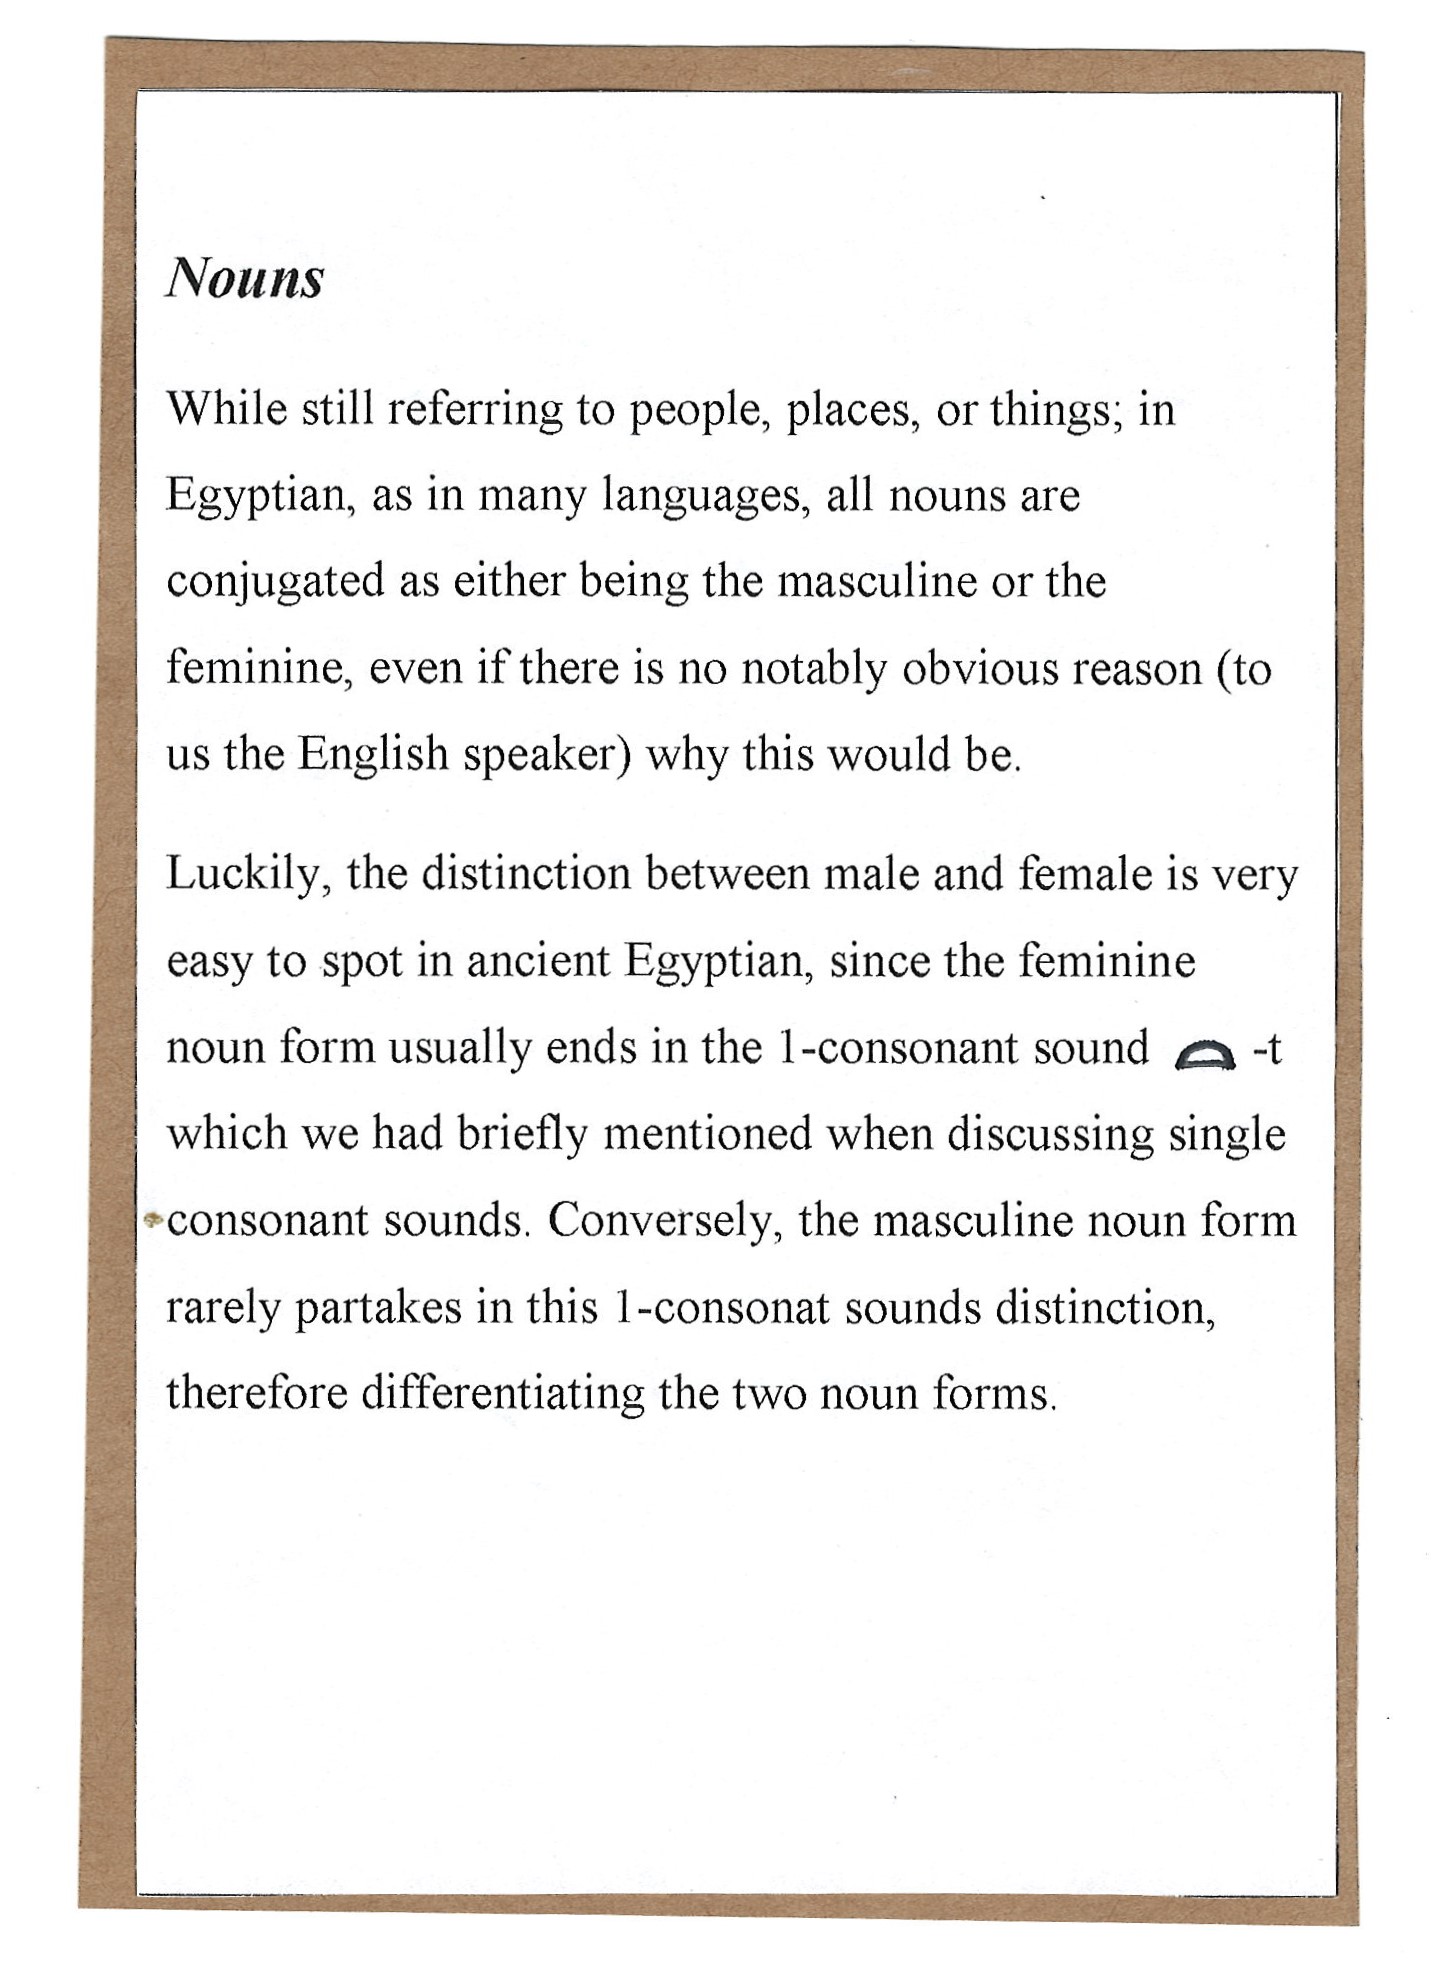 Page 10. Nouns in Egyptian Hieroglyphs and how that may differ from our own understanding in the English language.